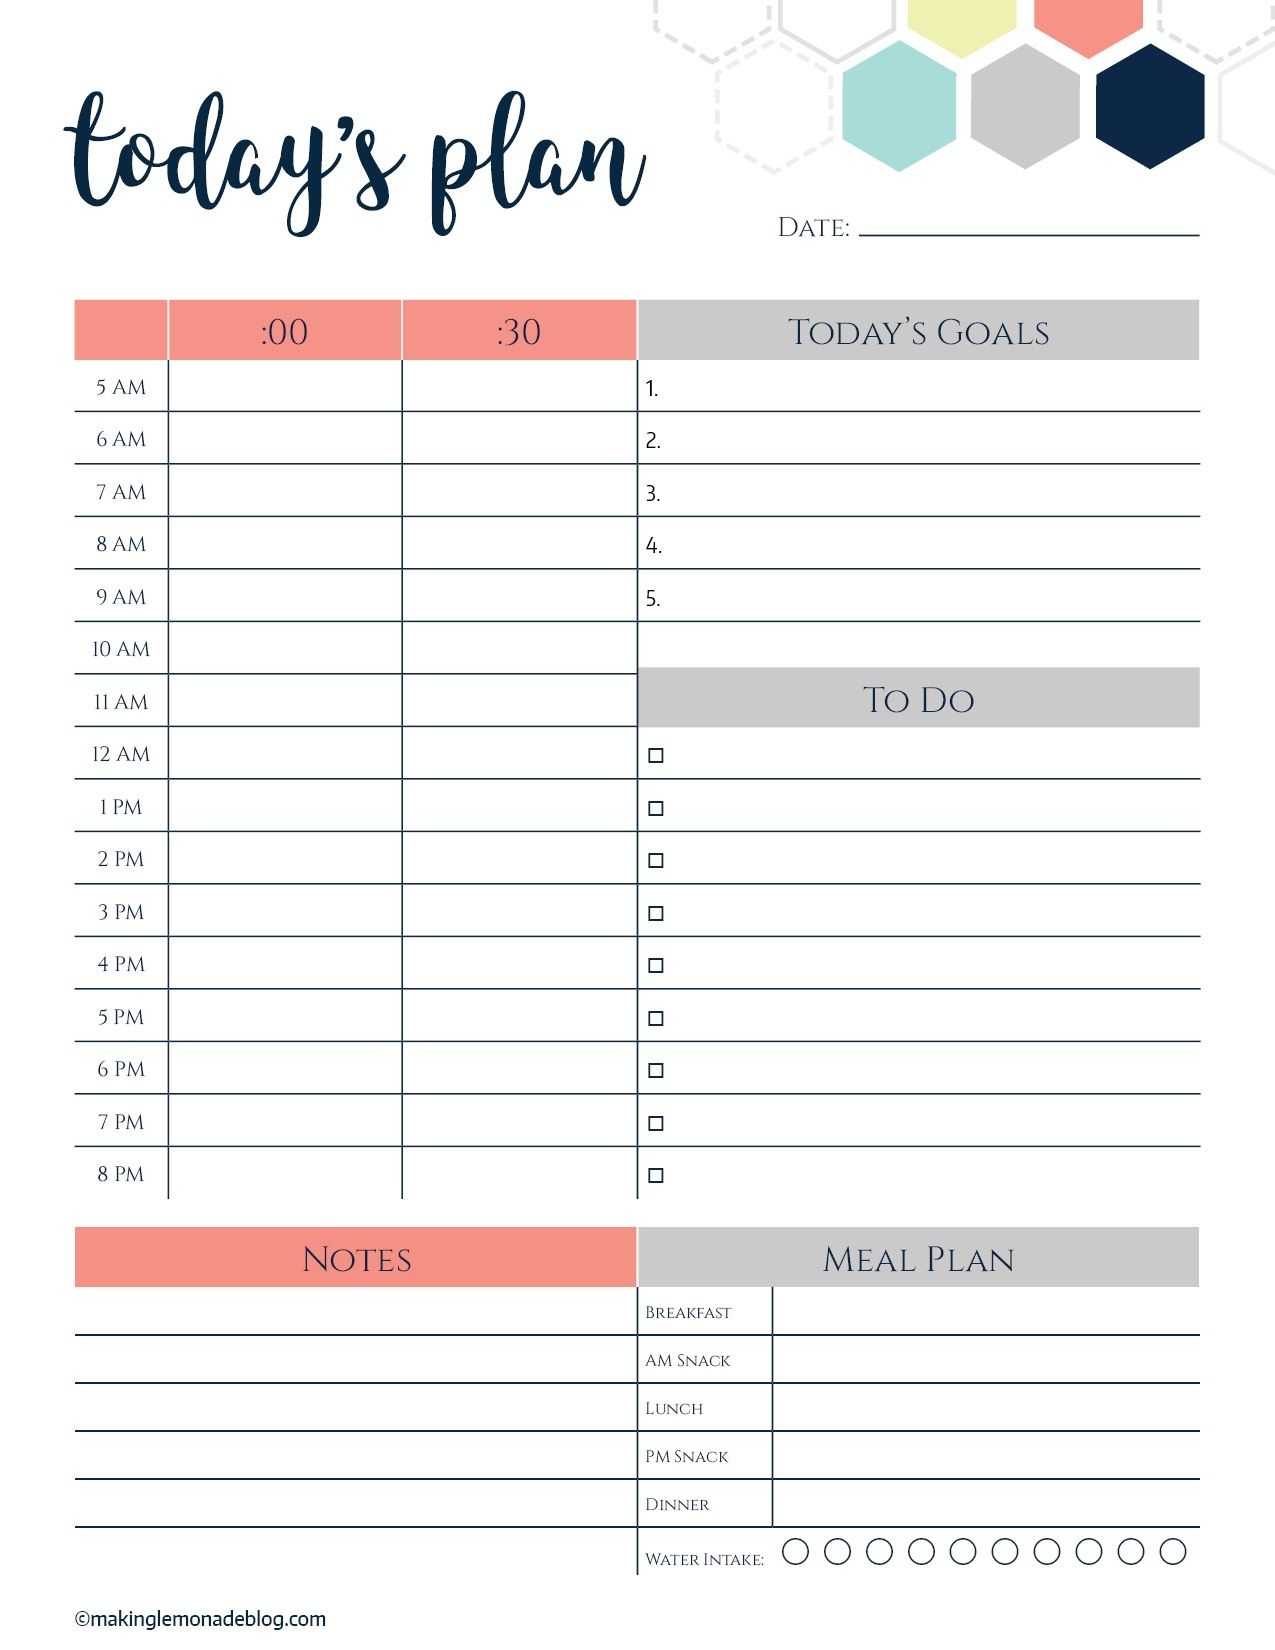 This Free Printable Daily Planner Changes Everything. Finally A Way inside Weekly Planner Printable 5 Am Start